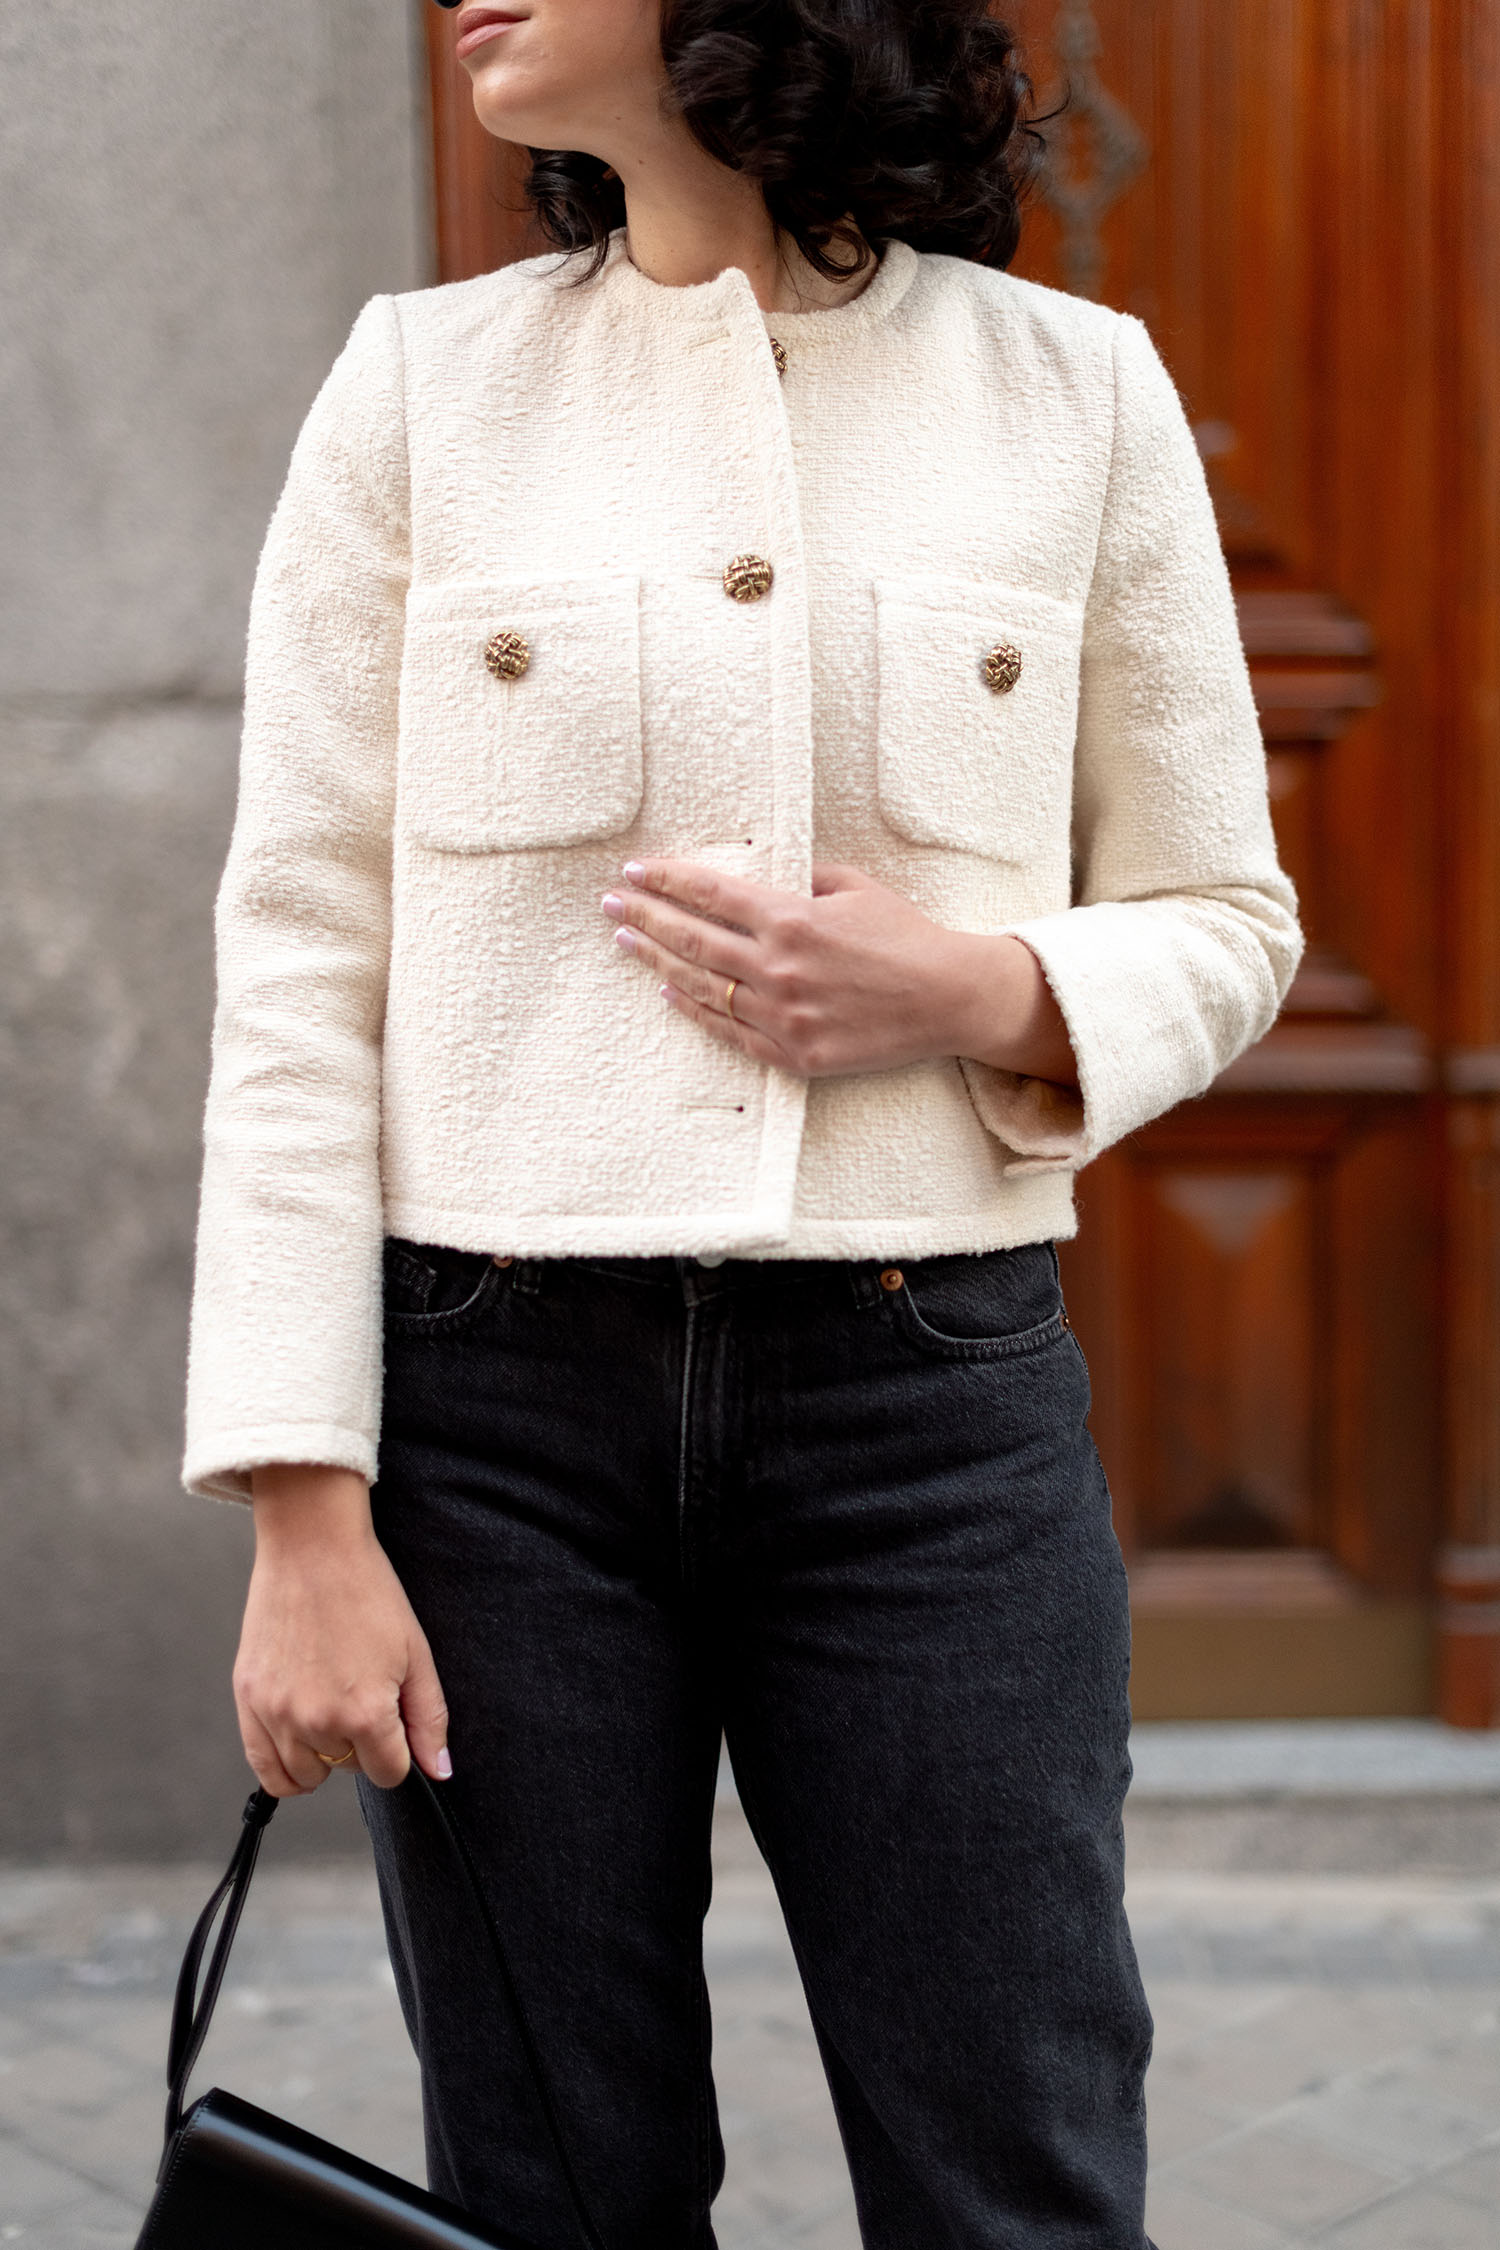 Coco & Voltaire - Maje Meredith jacket, Linjer ring, H&m jeans